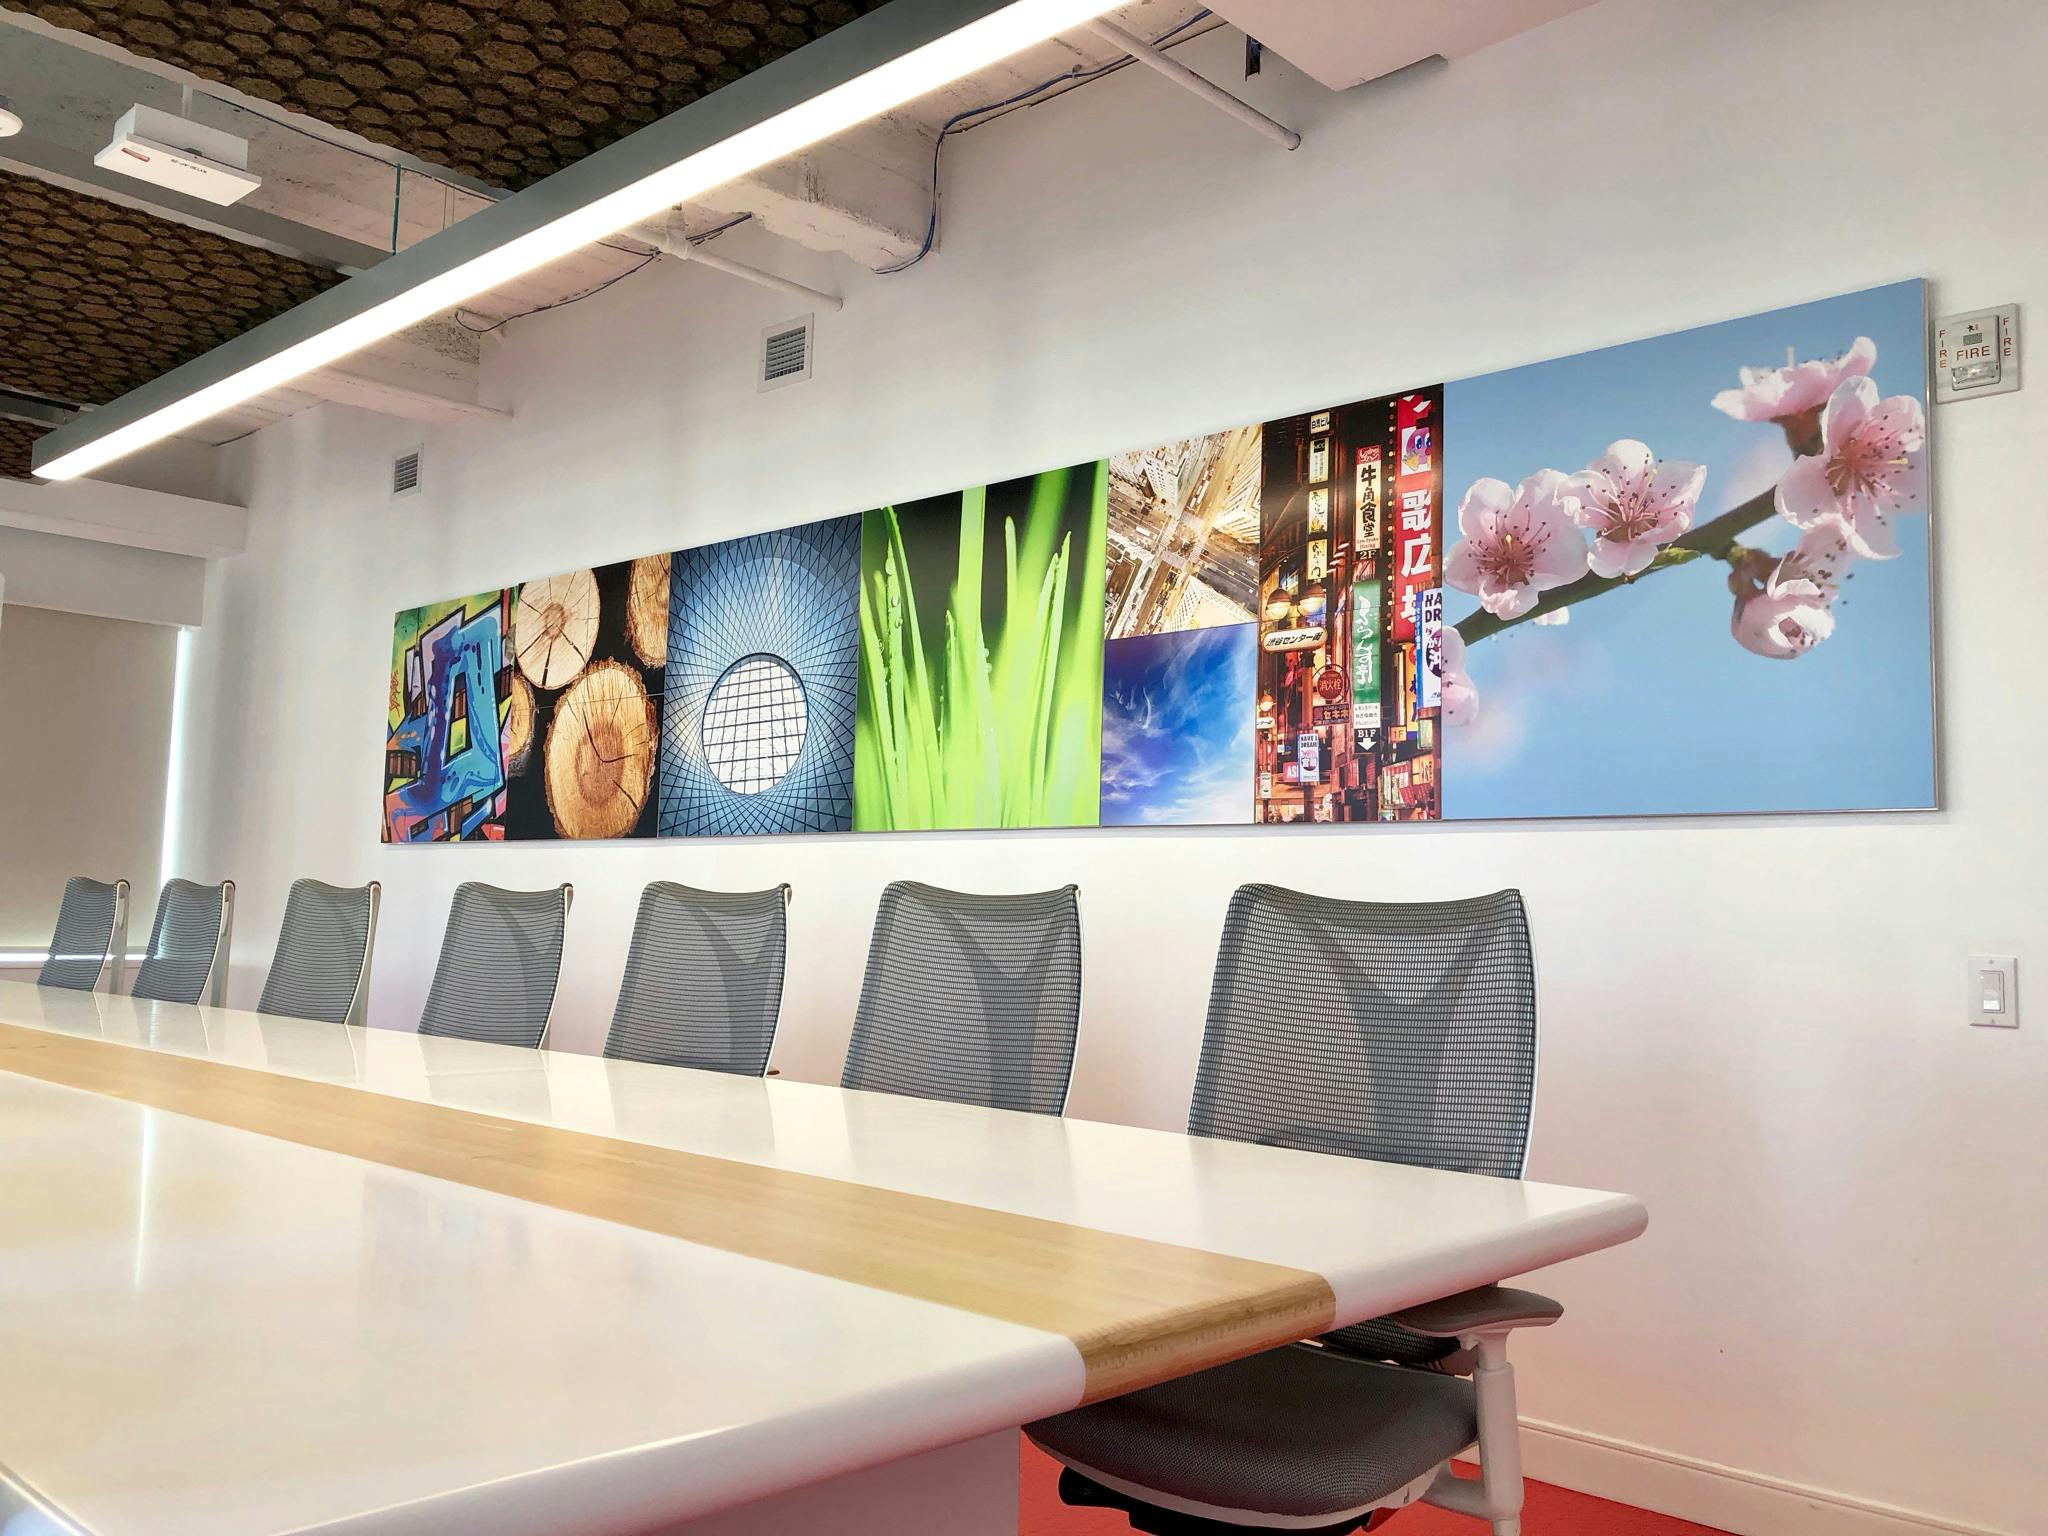 A conference room wall with images